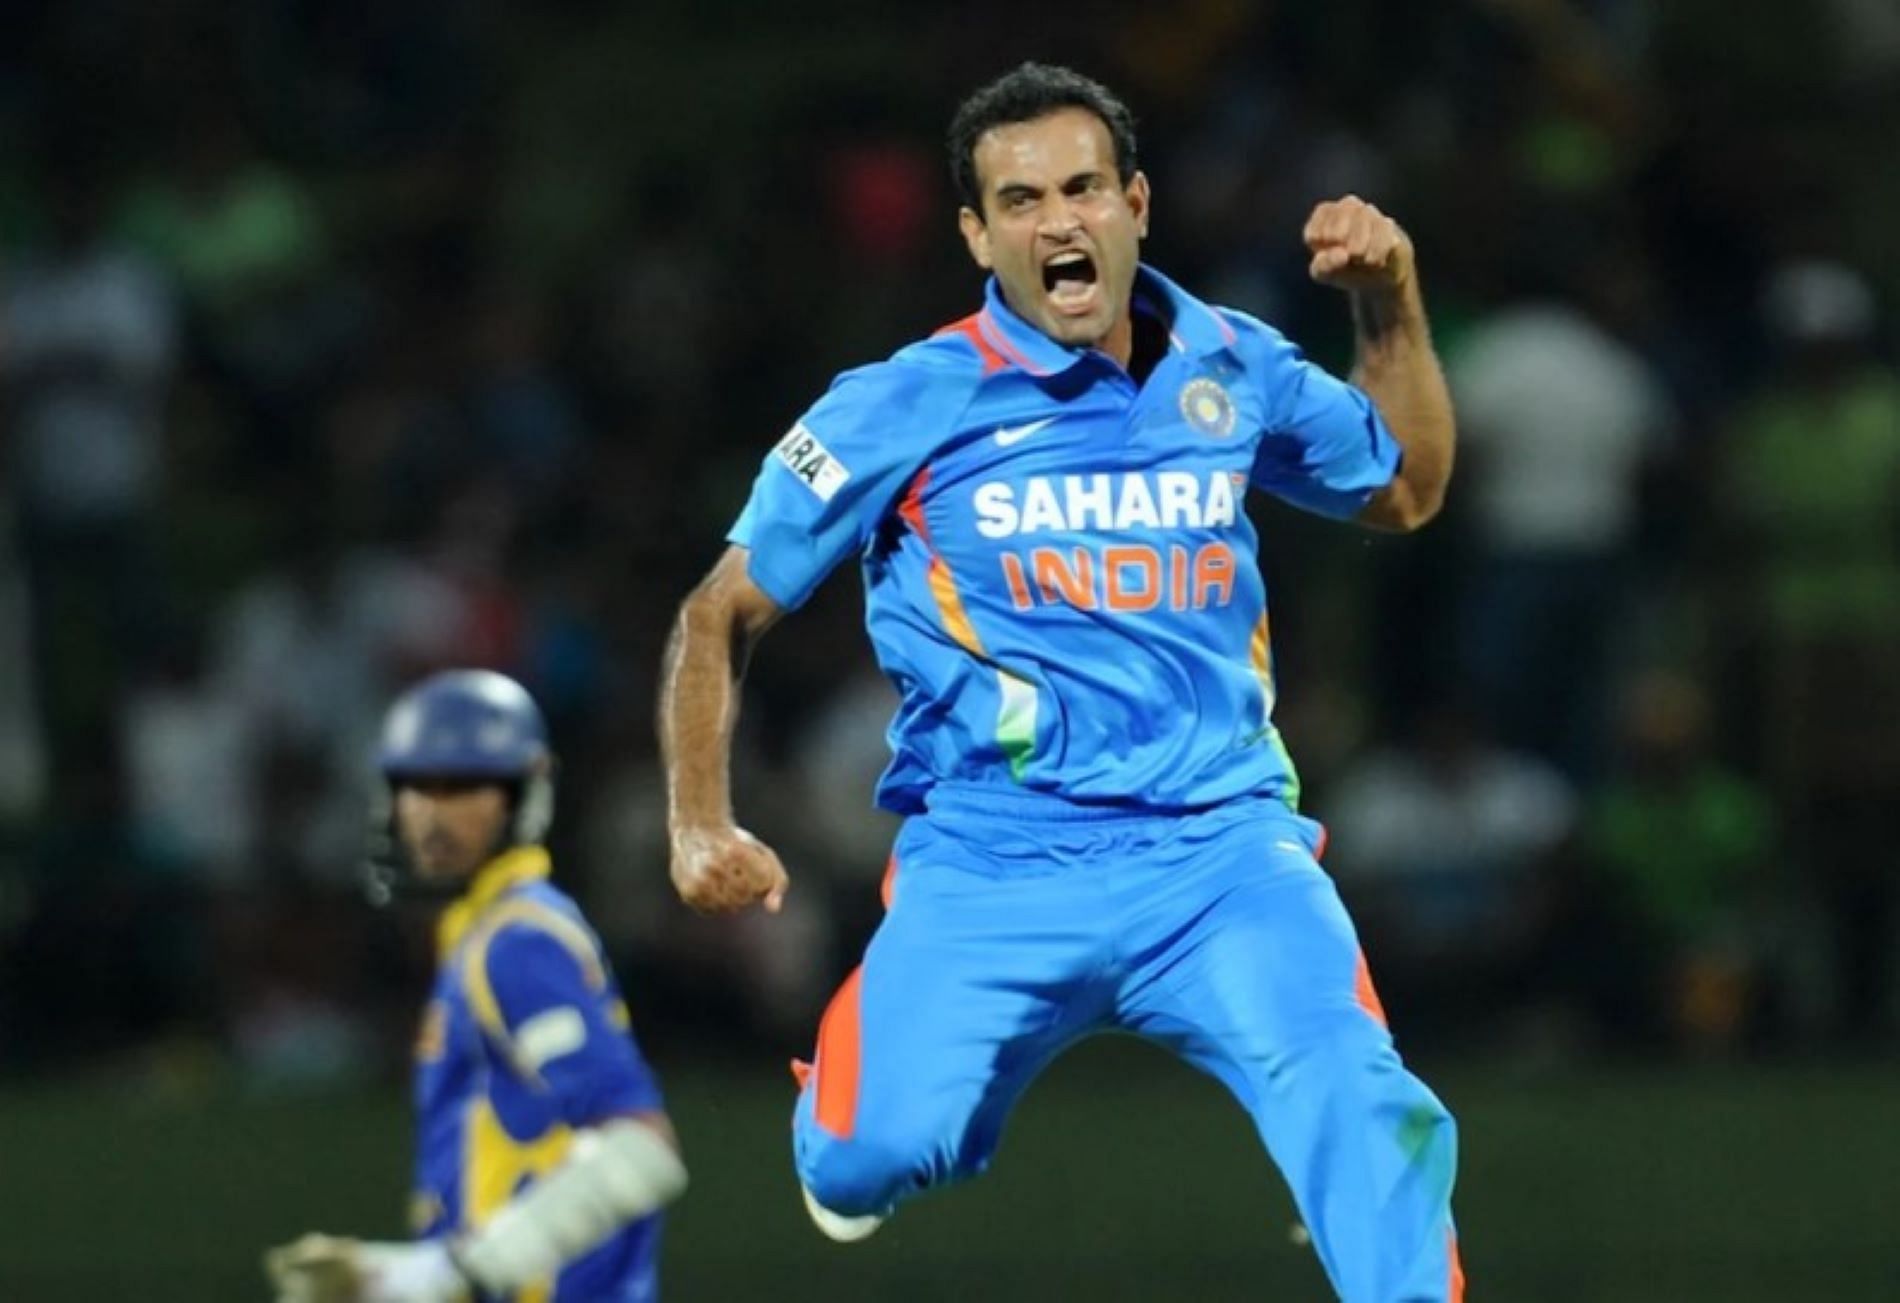 Irfan Pathan brought down the curtains on his ODI career with a brilliant all-round showing.